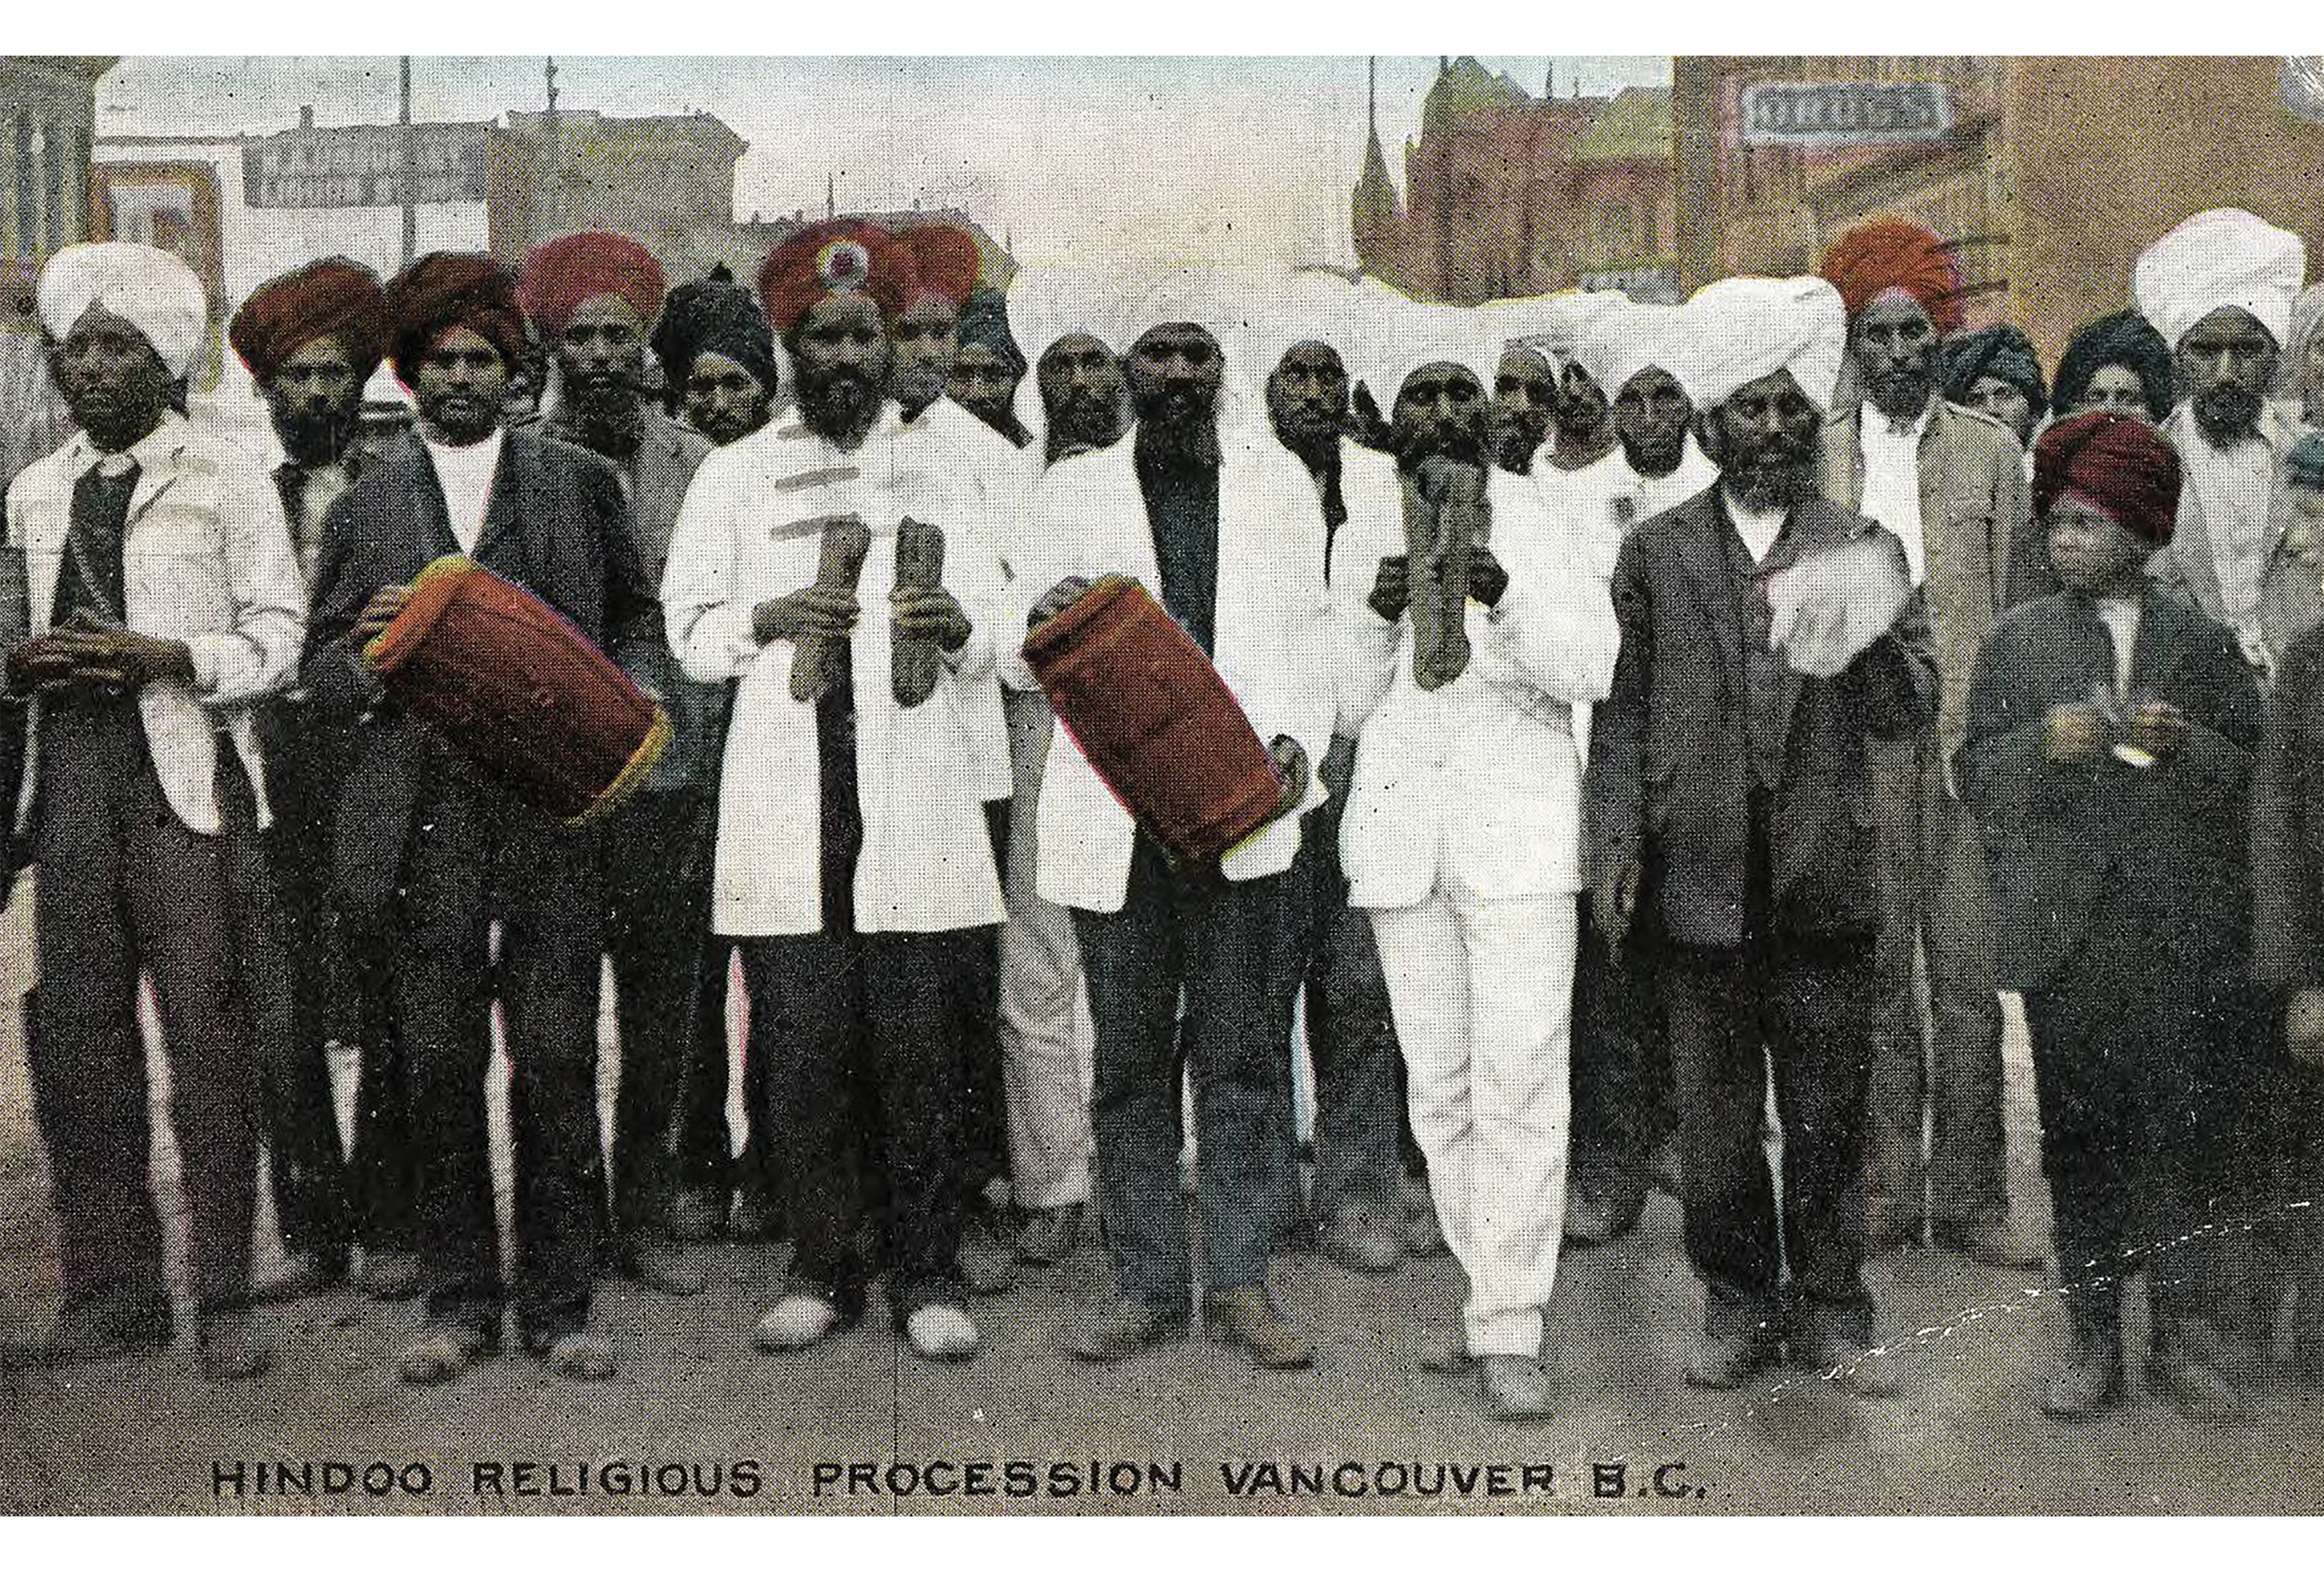 Hindoo Religious Procession in Vancouver, BC, 1905.